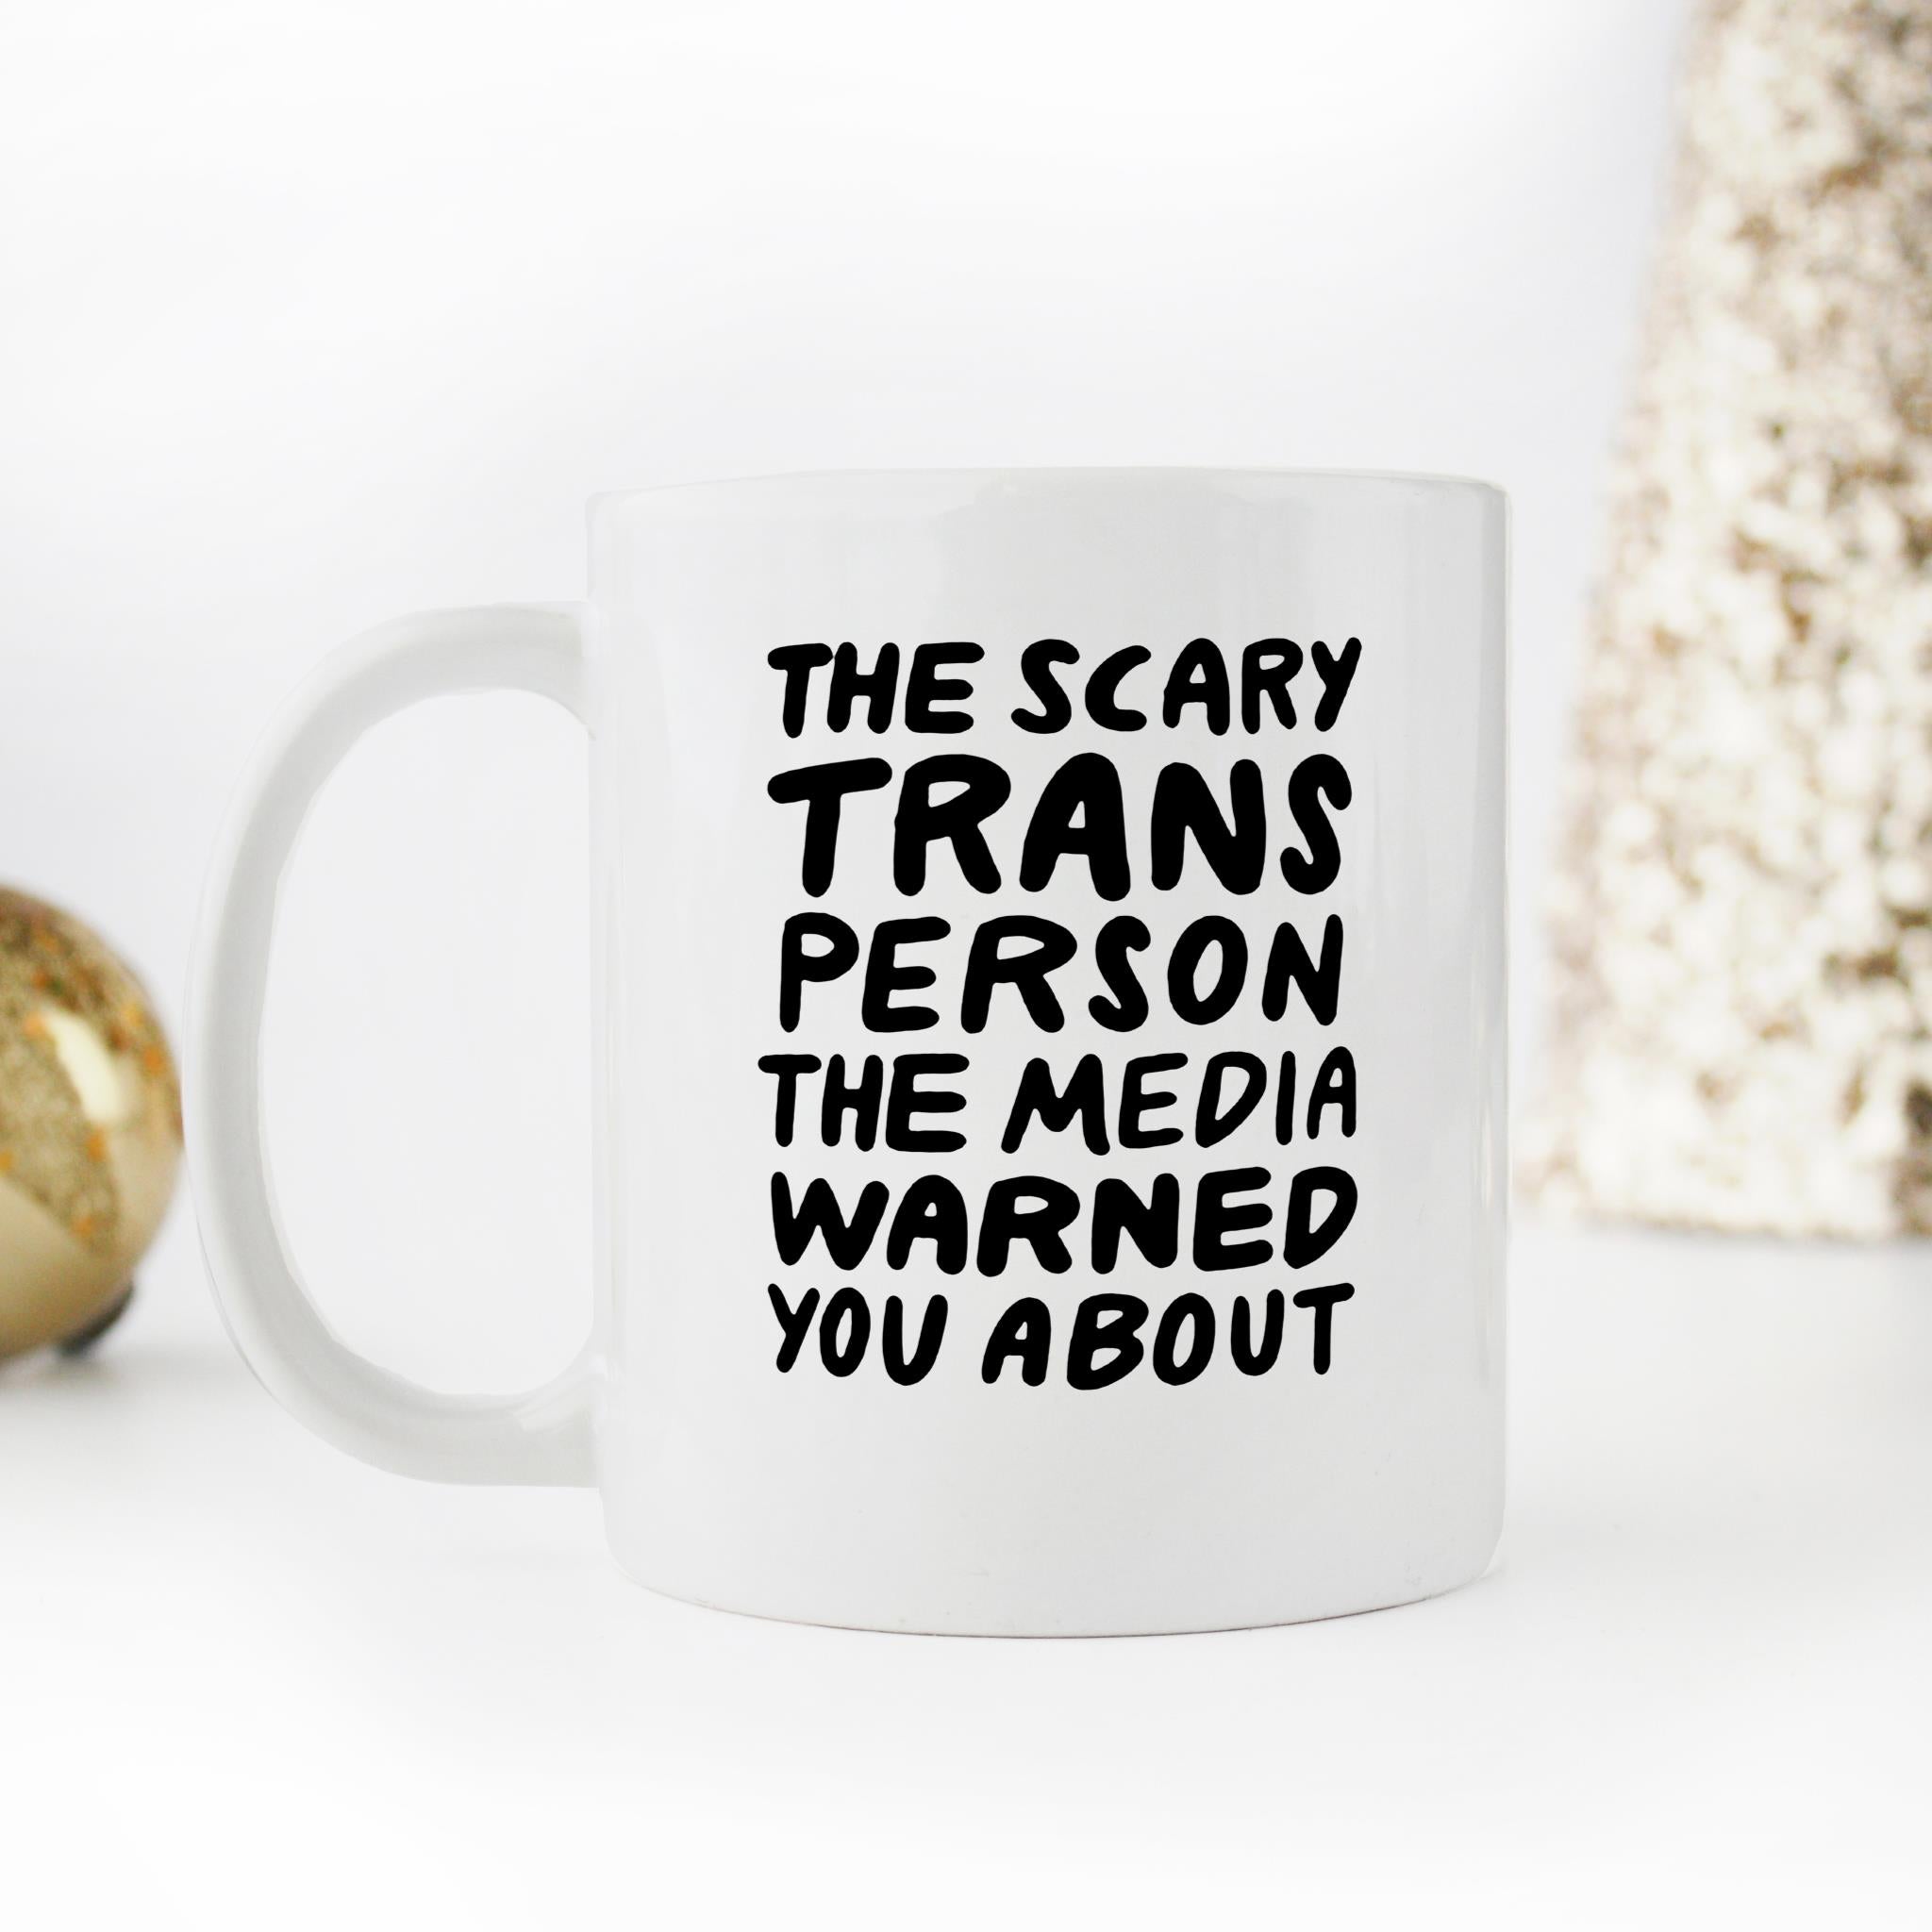 Skitongifts Funny Ceramic Novelty Coffee Mug The Scary Trans Person The Media Warned You About Funny Lgbt Pride Flag BmkL1gj